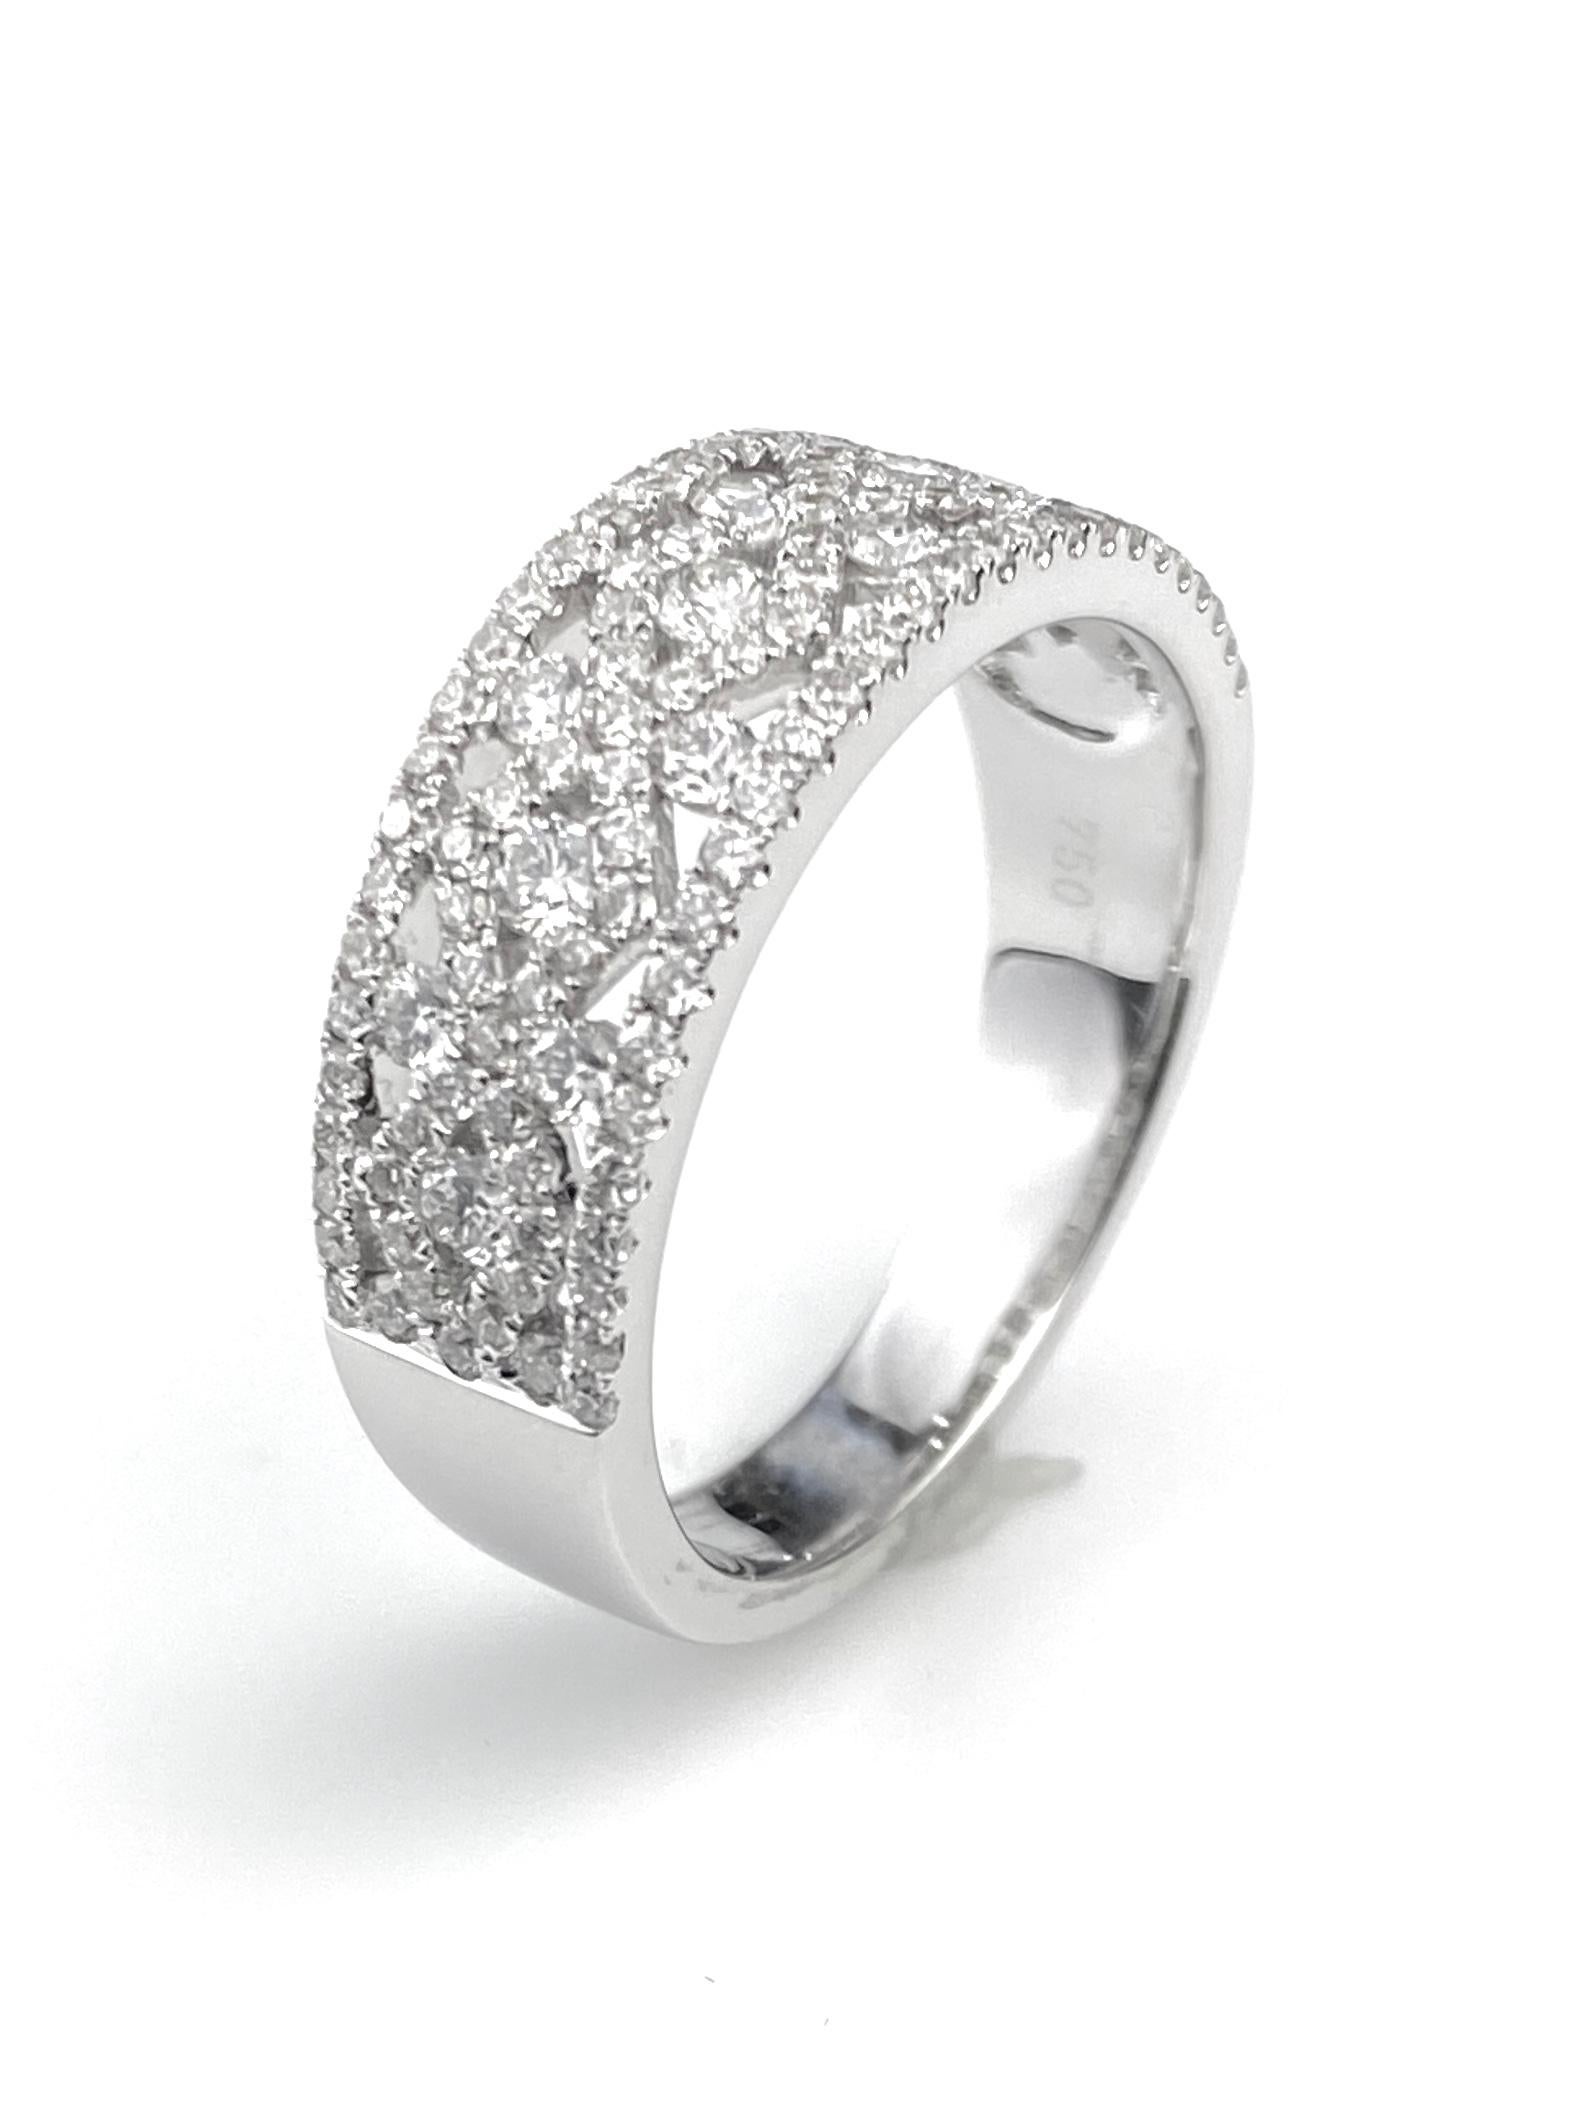 Contemporary Diamond Right Hand Ring with Patterned Design For Sale